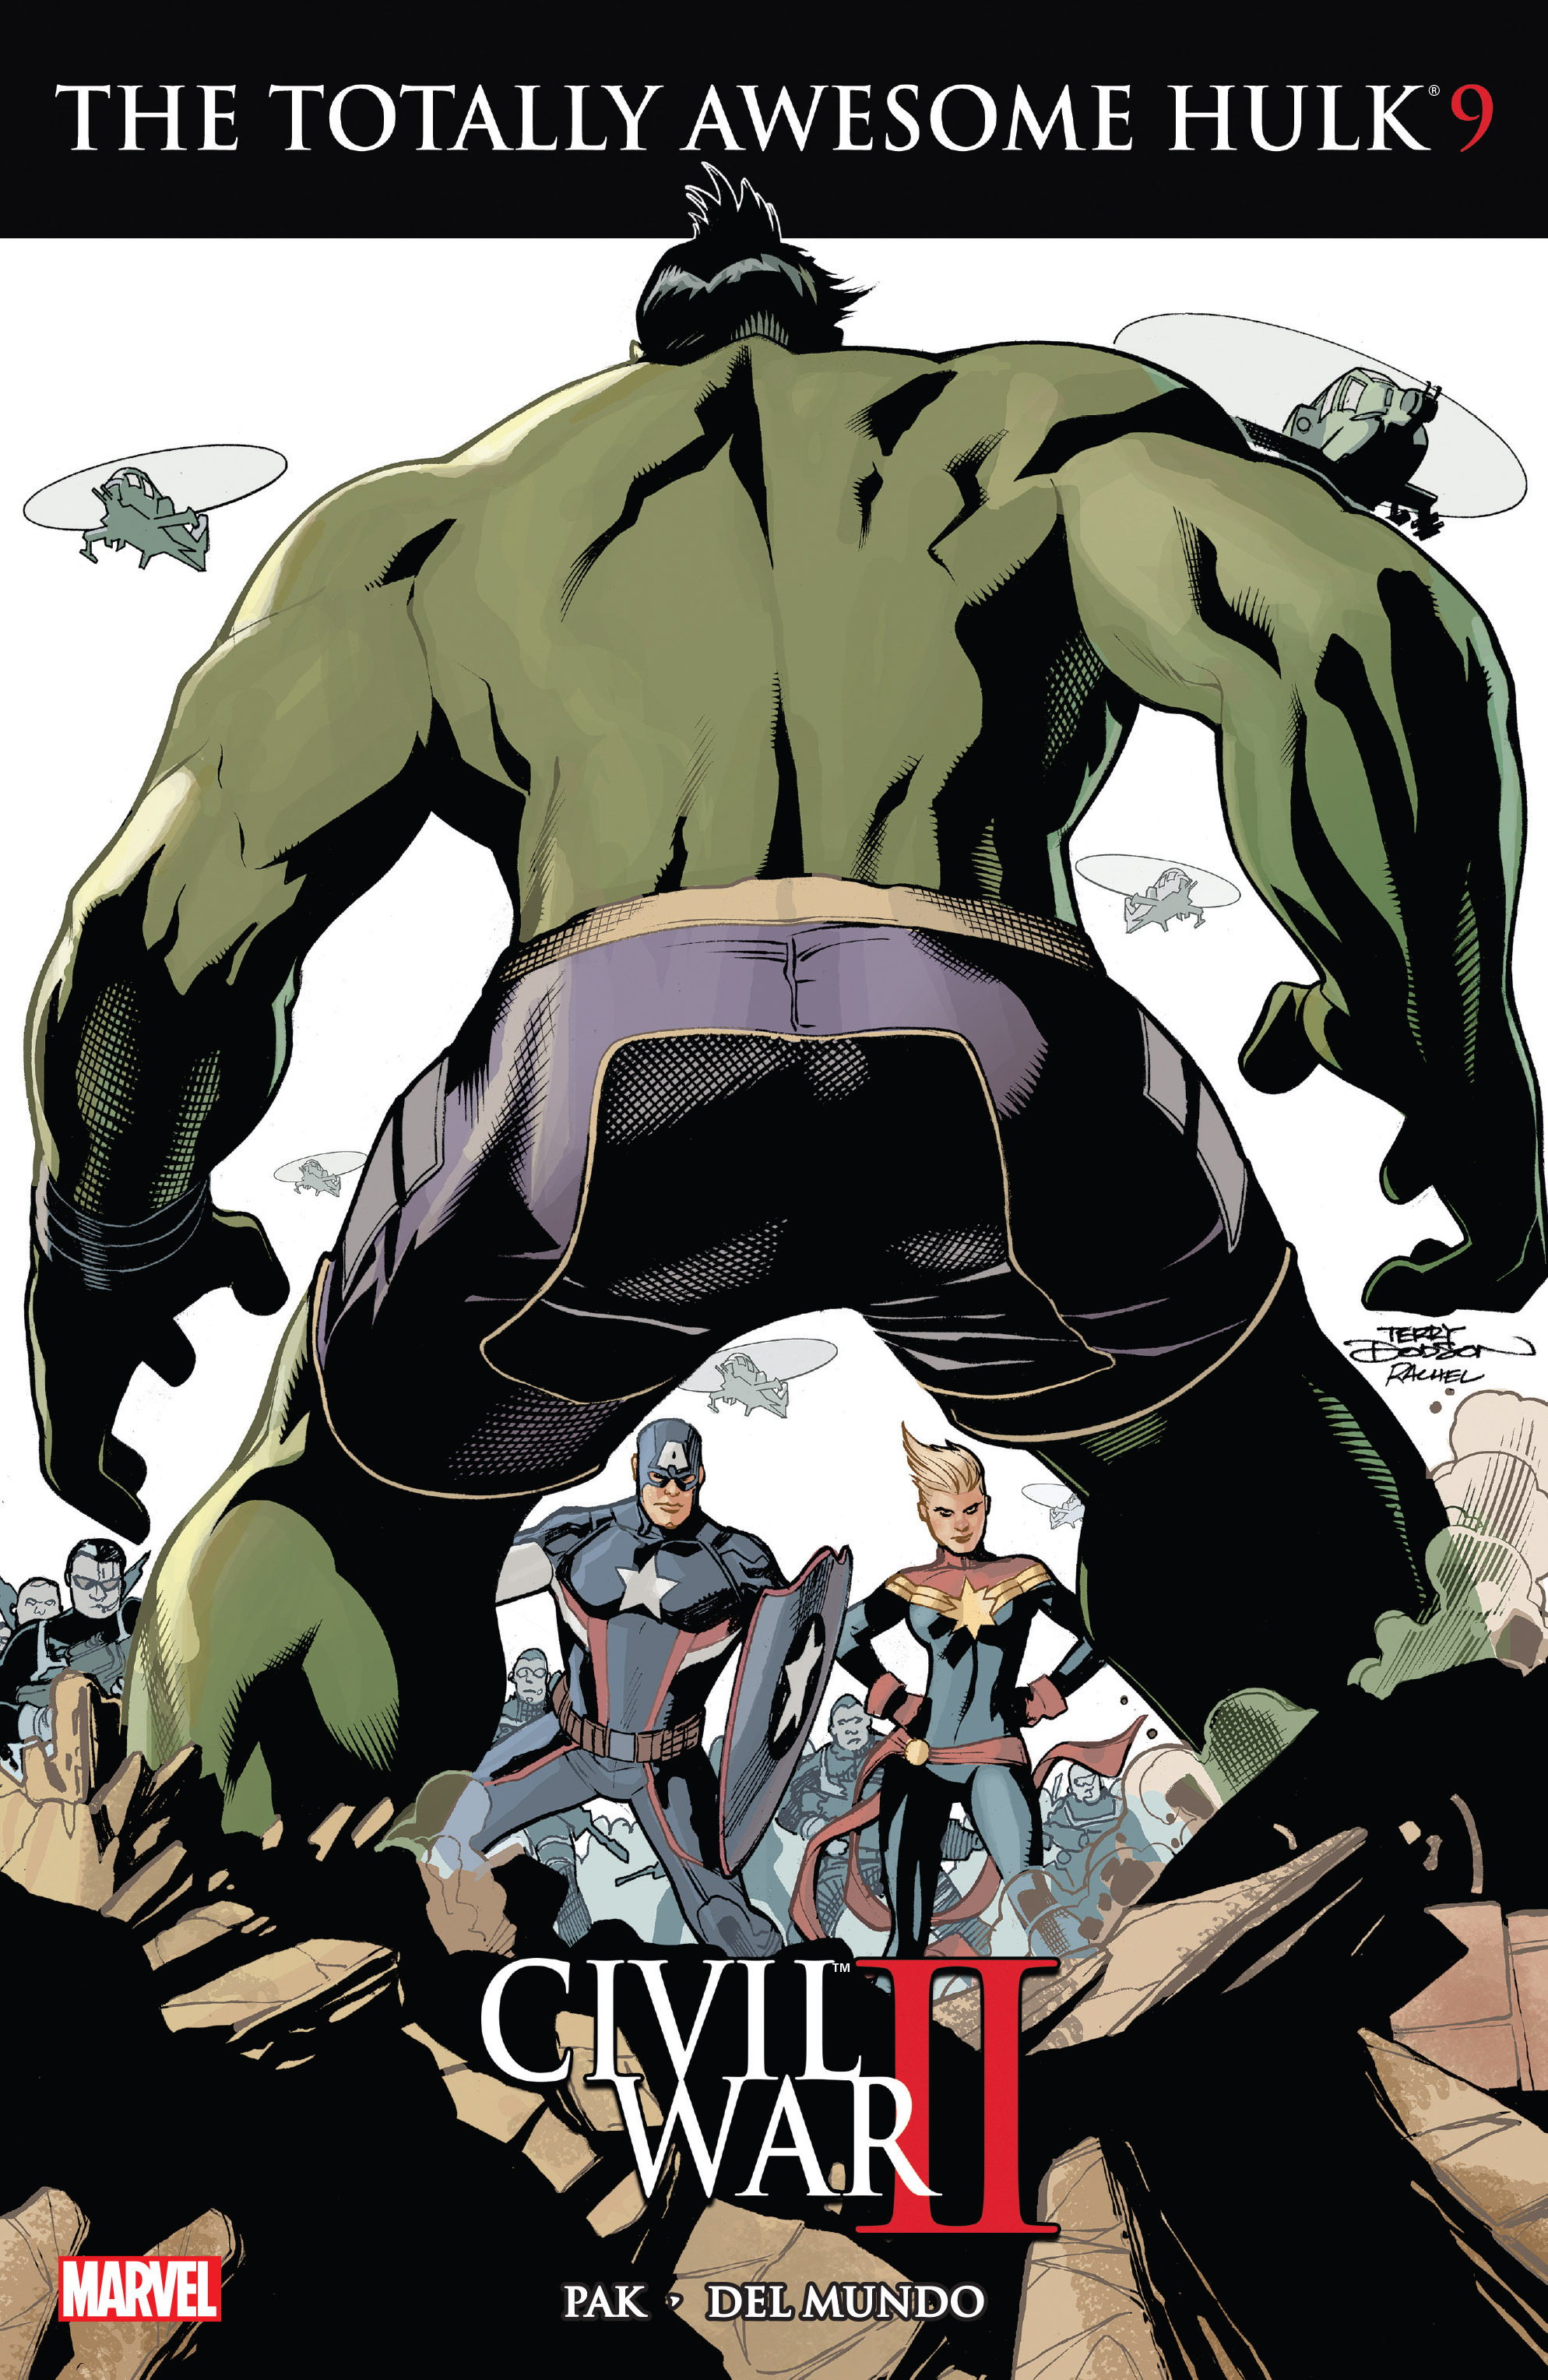 The Totally Awesome Hulk #09